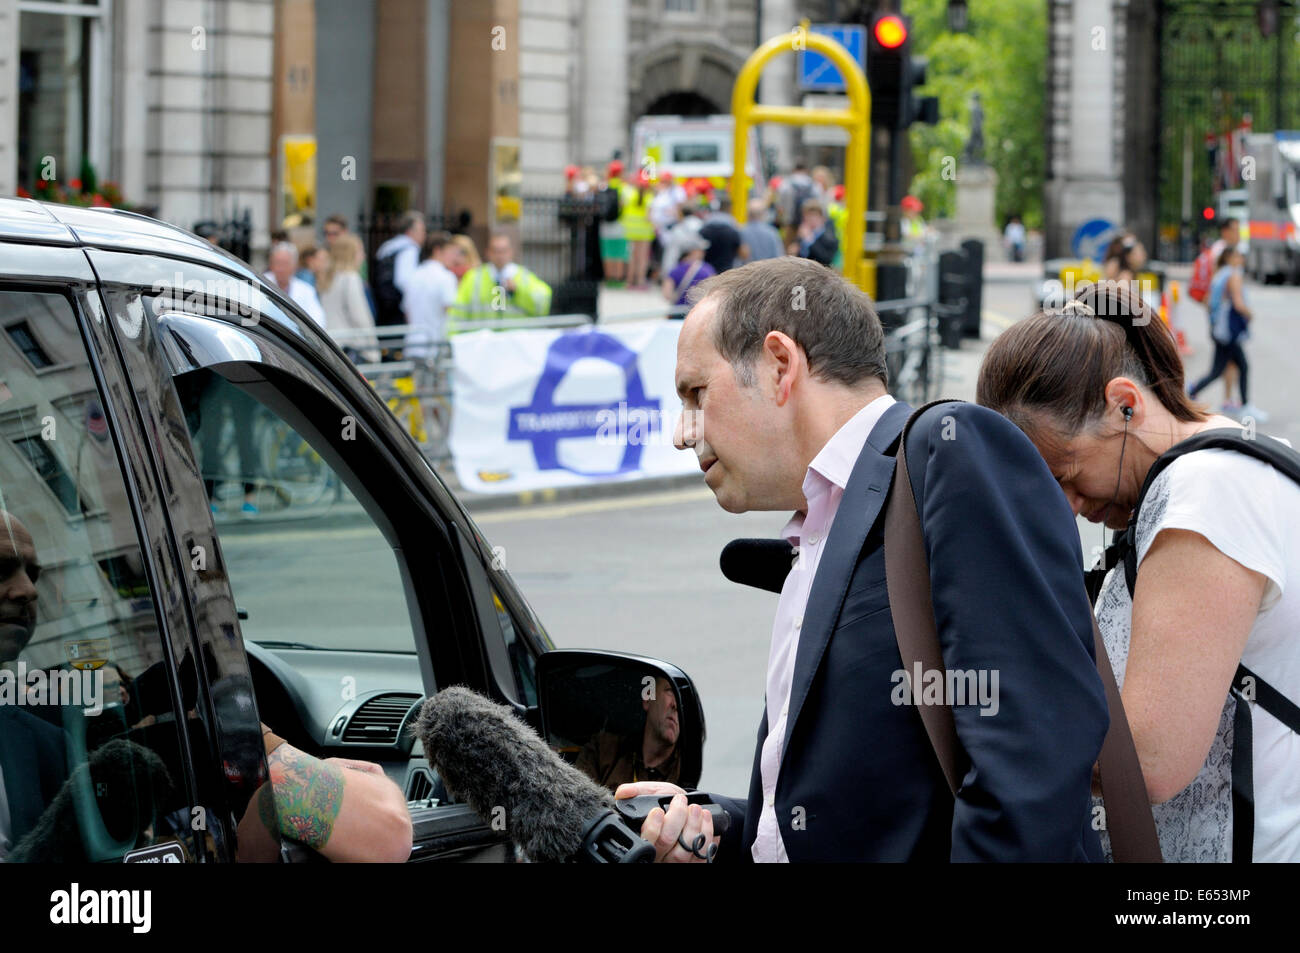 Rory Cellan-Jones, BBC's Technology Correspondent, interviewing a taxi driver in central London Stock Photo